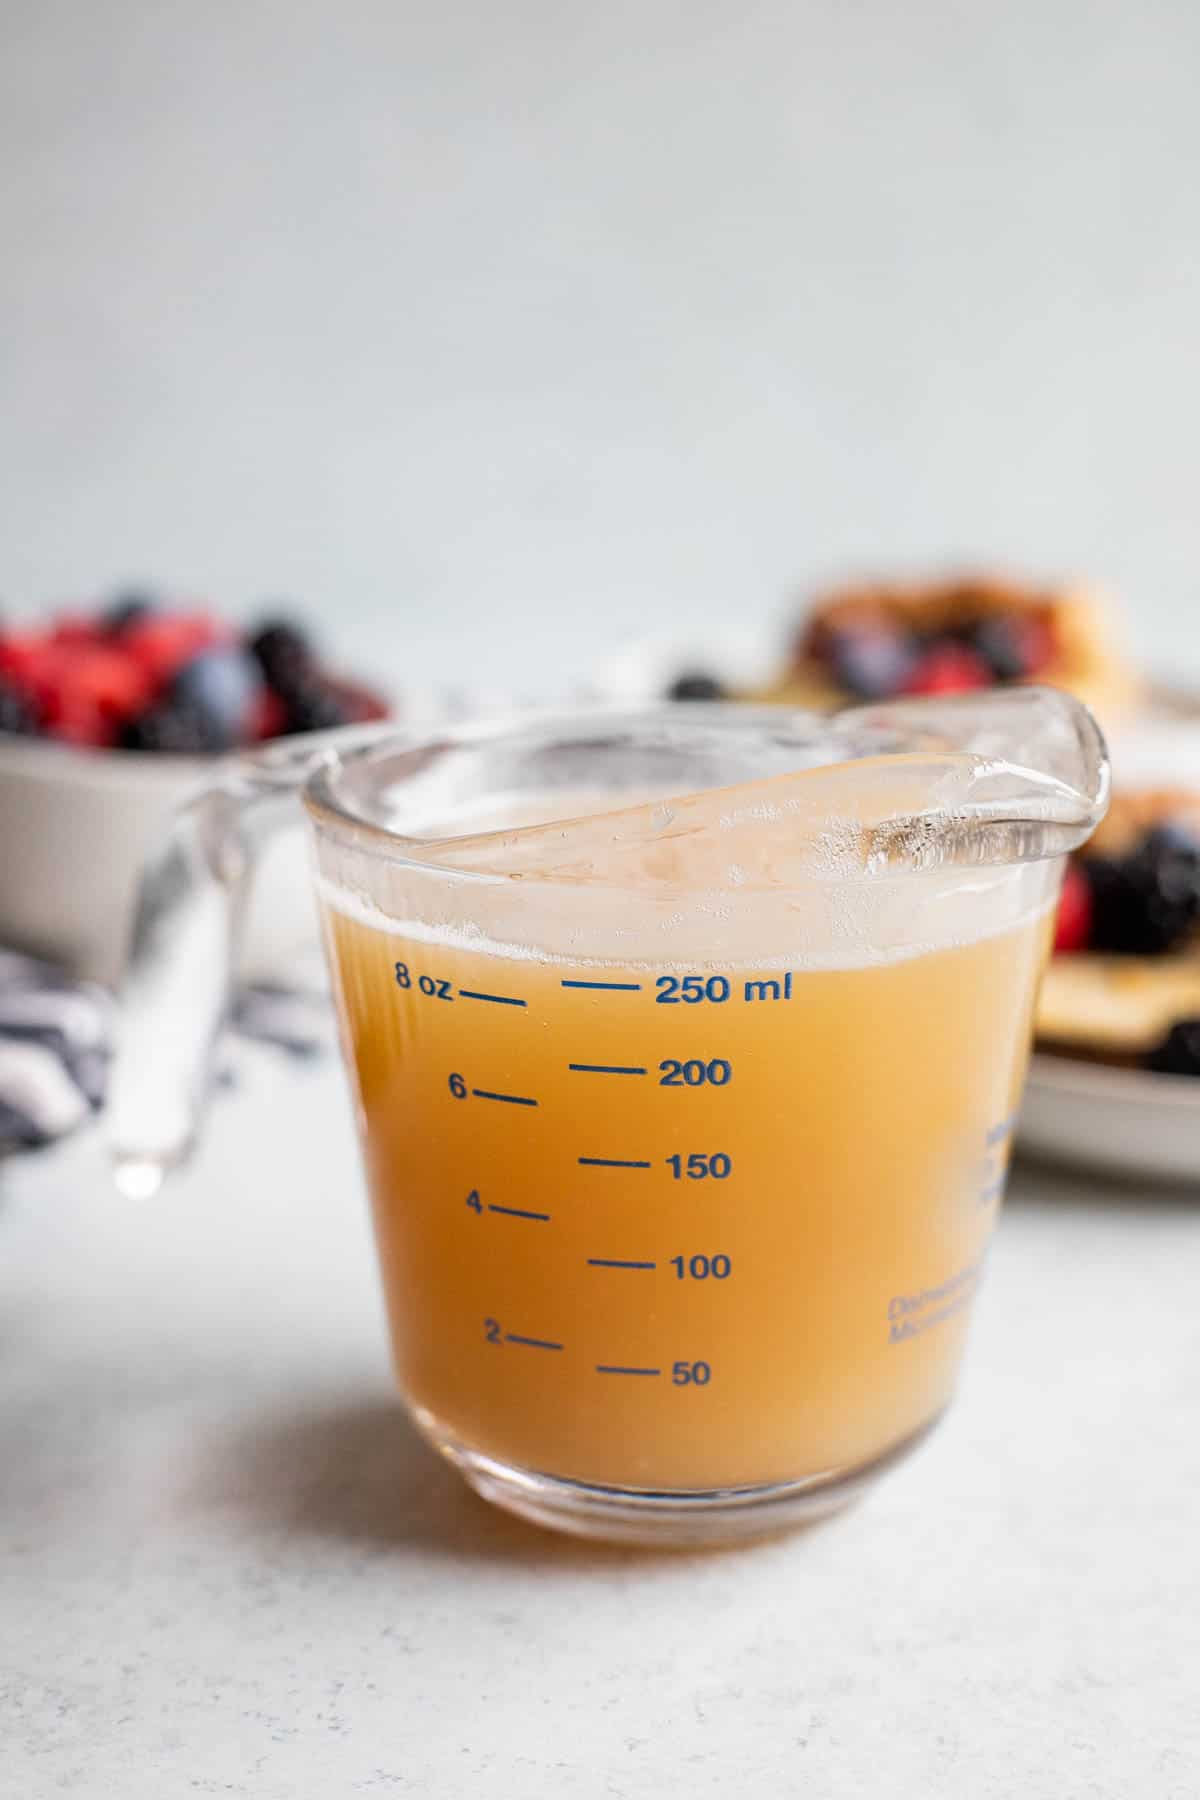 Buttermilk syrup in a glass measuring cup.